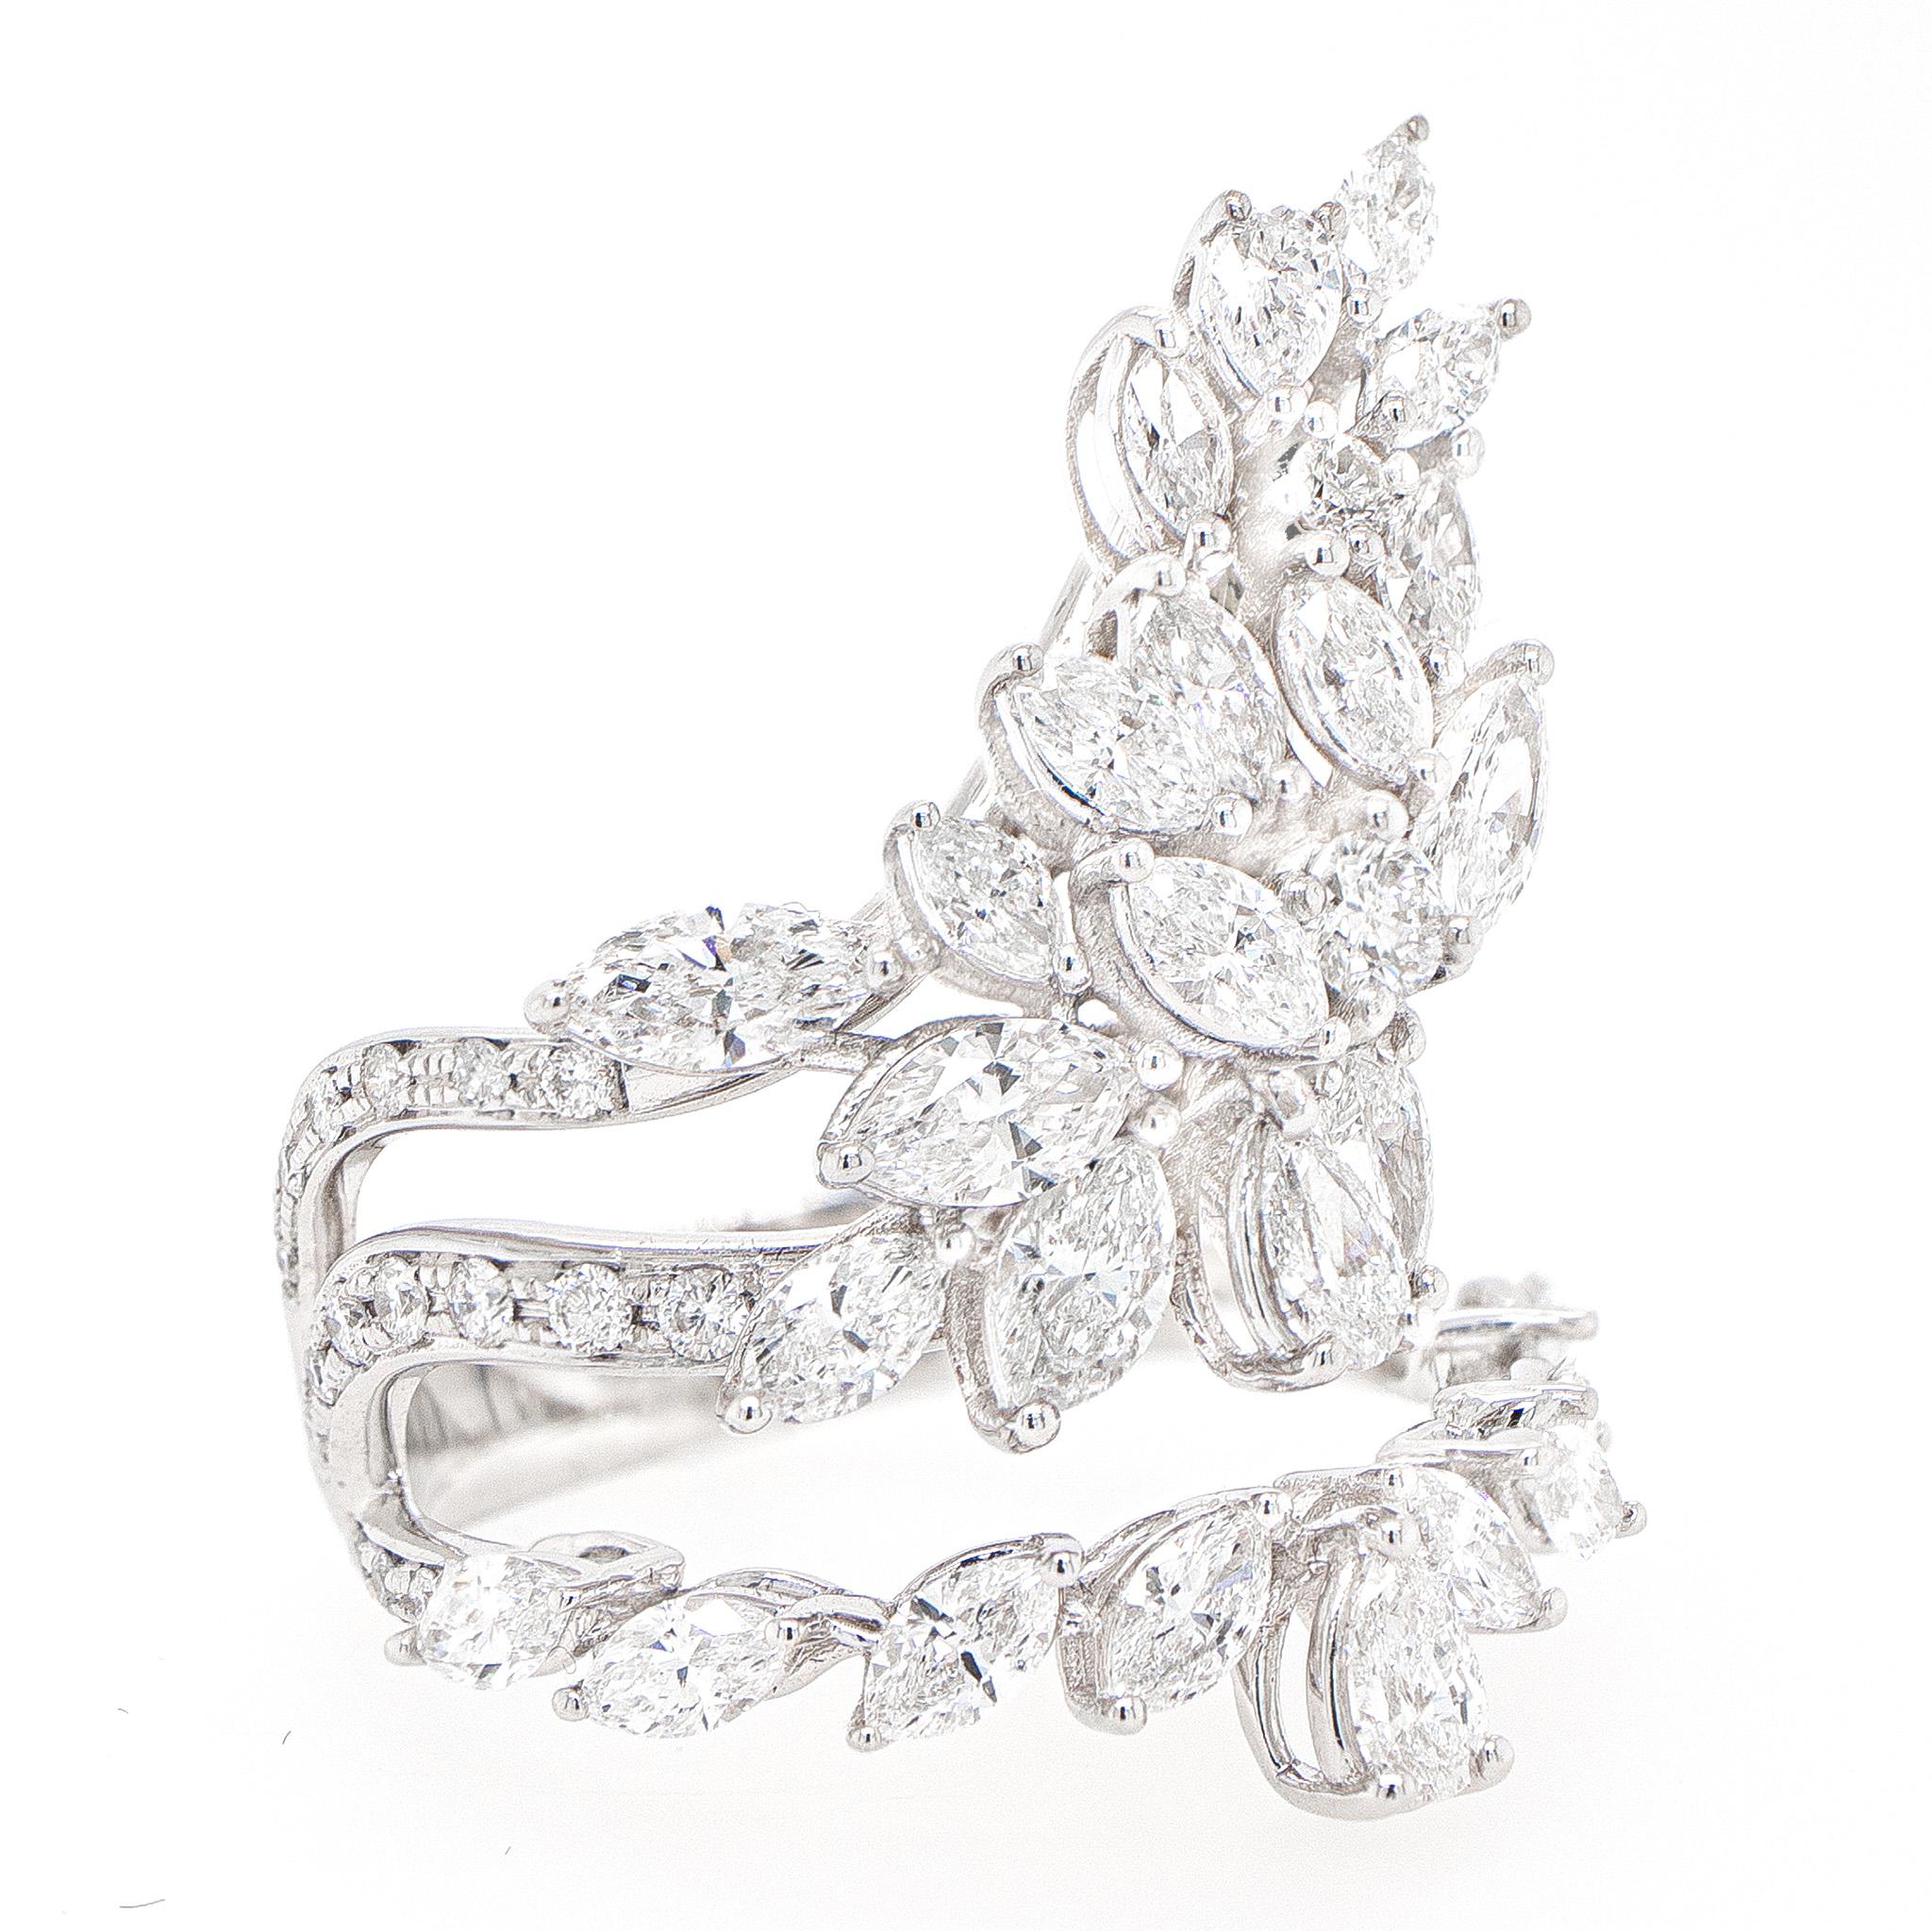 Marquise Cut Diamond Cocktail Ring 2.71 Carats 18K White Gold